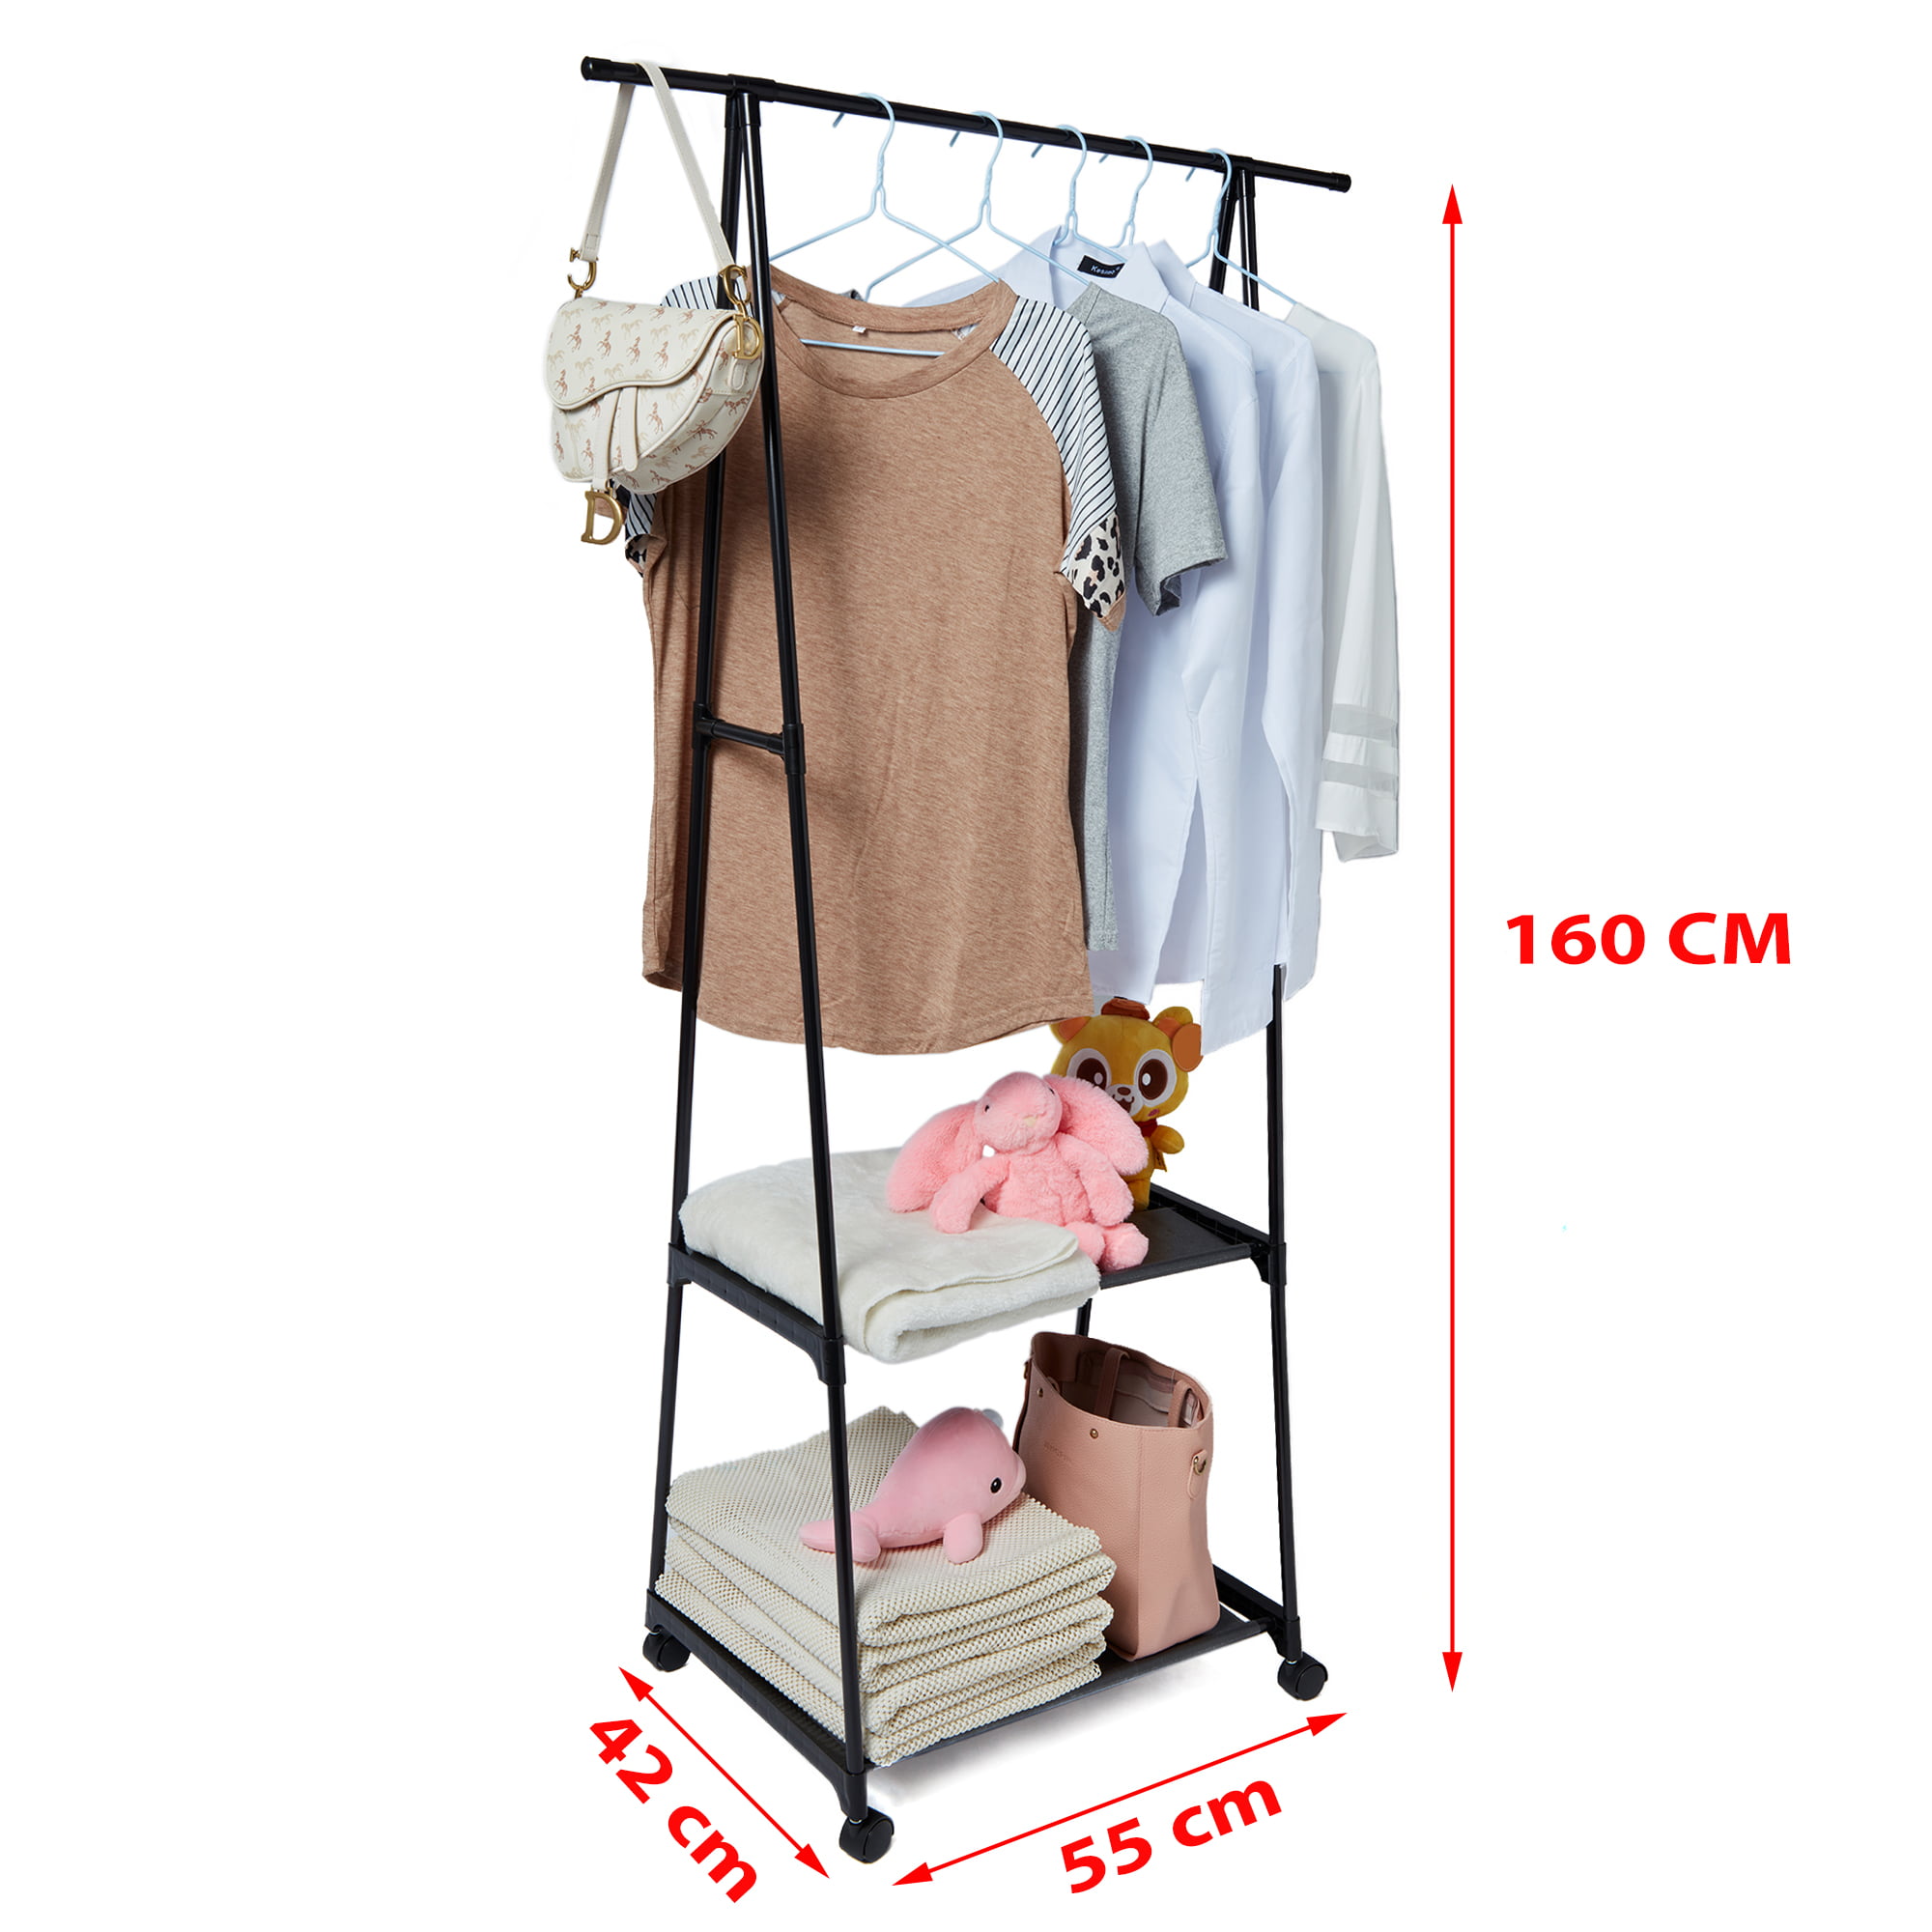 Find the value of x on the clothes hanger. What type of triangle must the  hanger be to hang clothes evenly? 